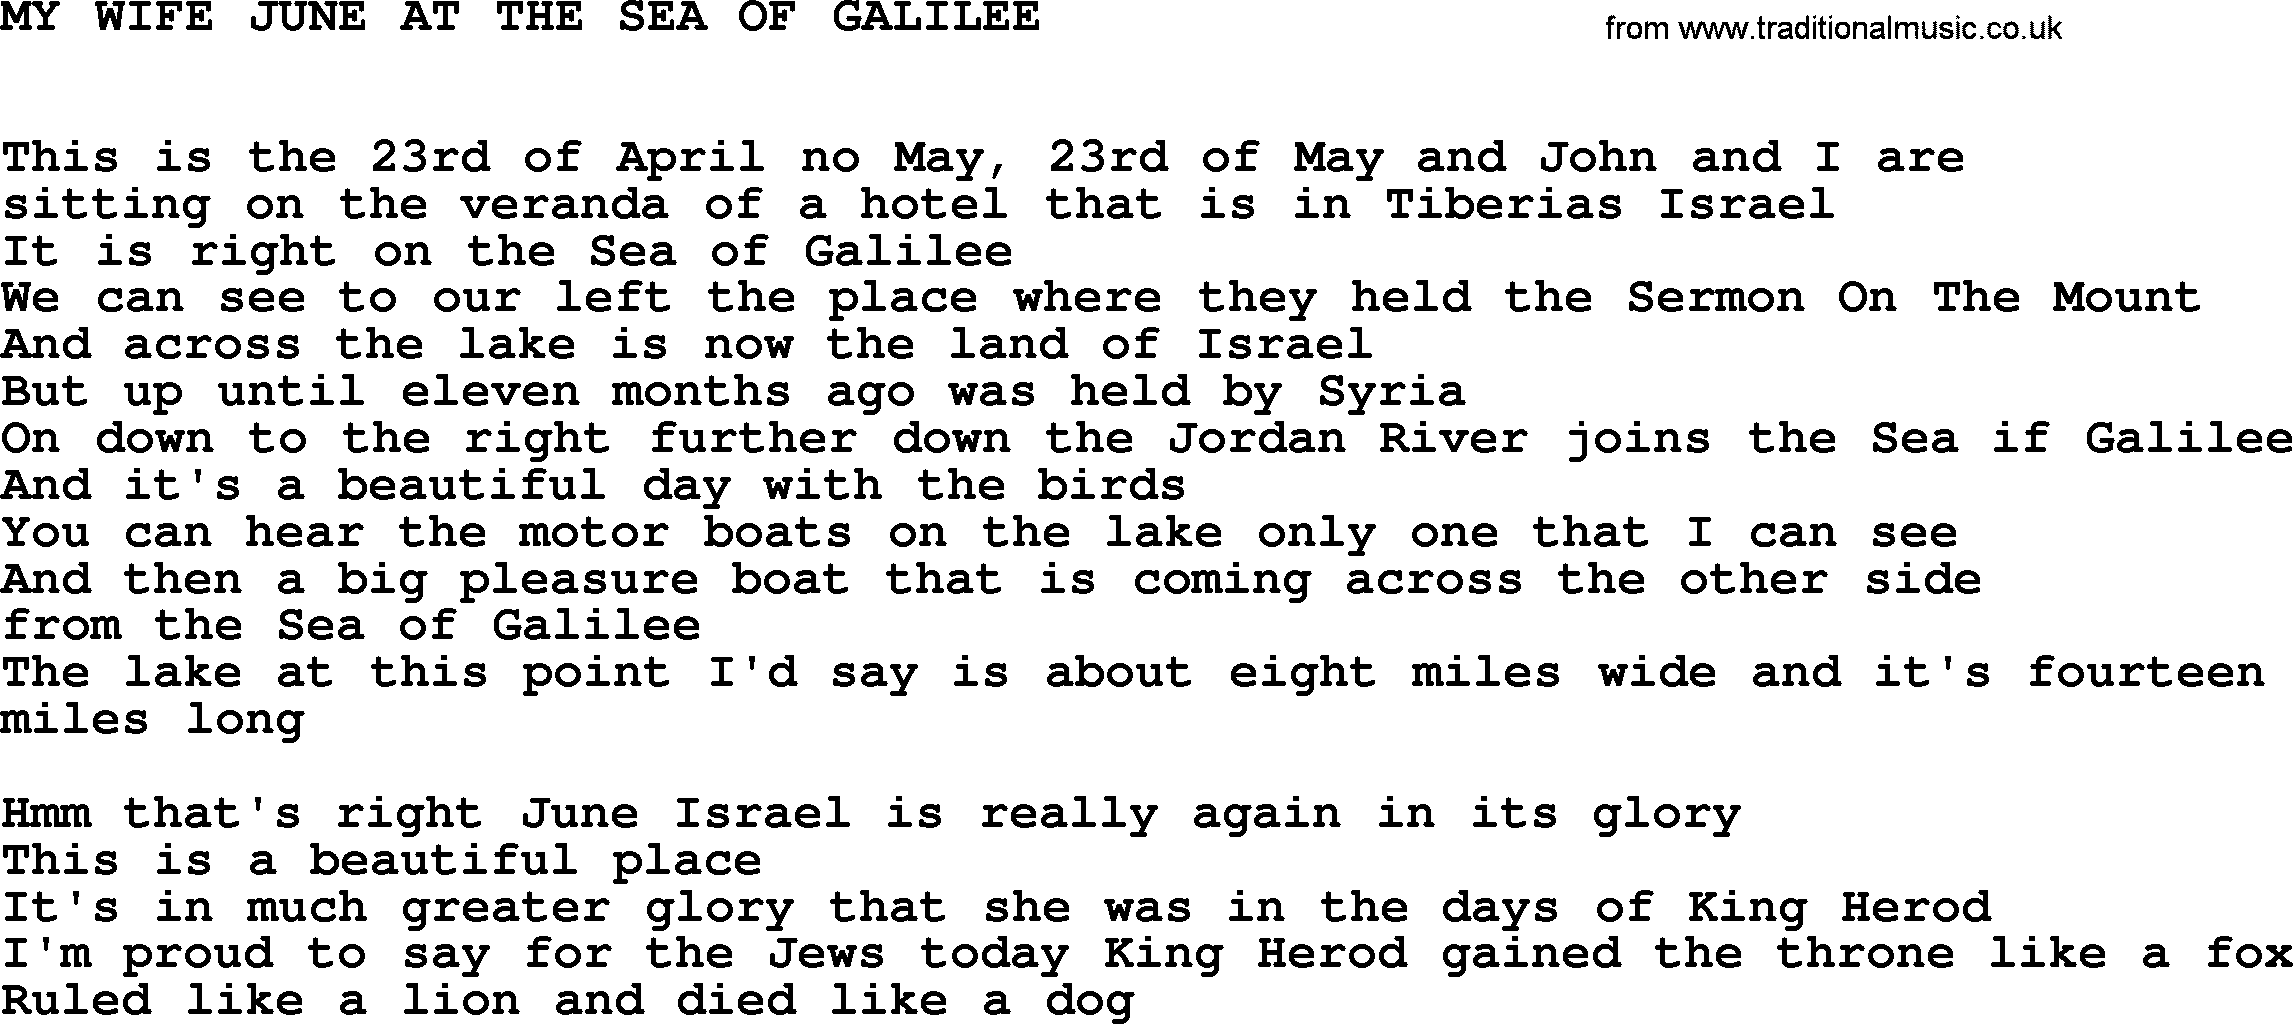 Johnny Cash song My Wife June At The Sea Of Galilee.txt lyrics